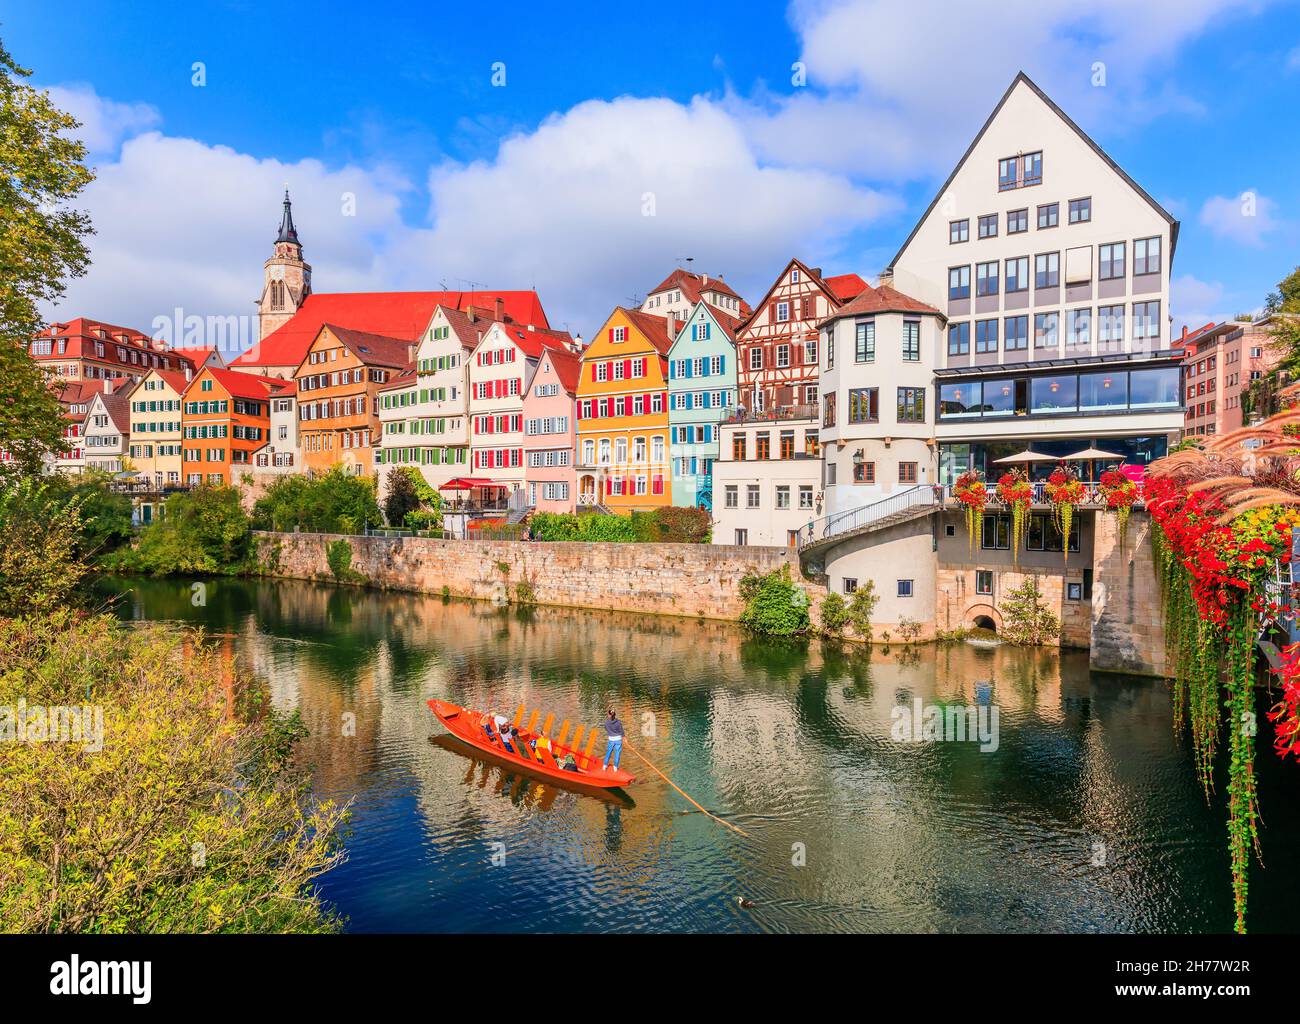 Tubingen, Germany. Colorful old town on the river Neckar. Stock Photo